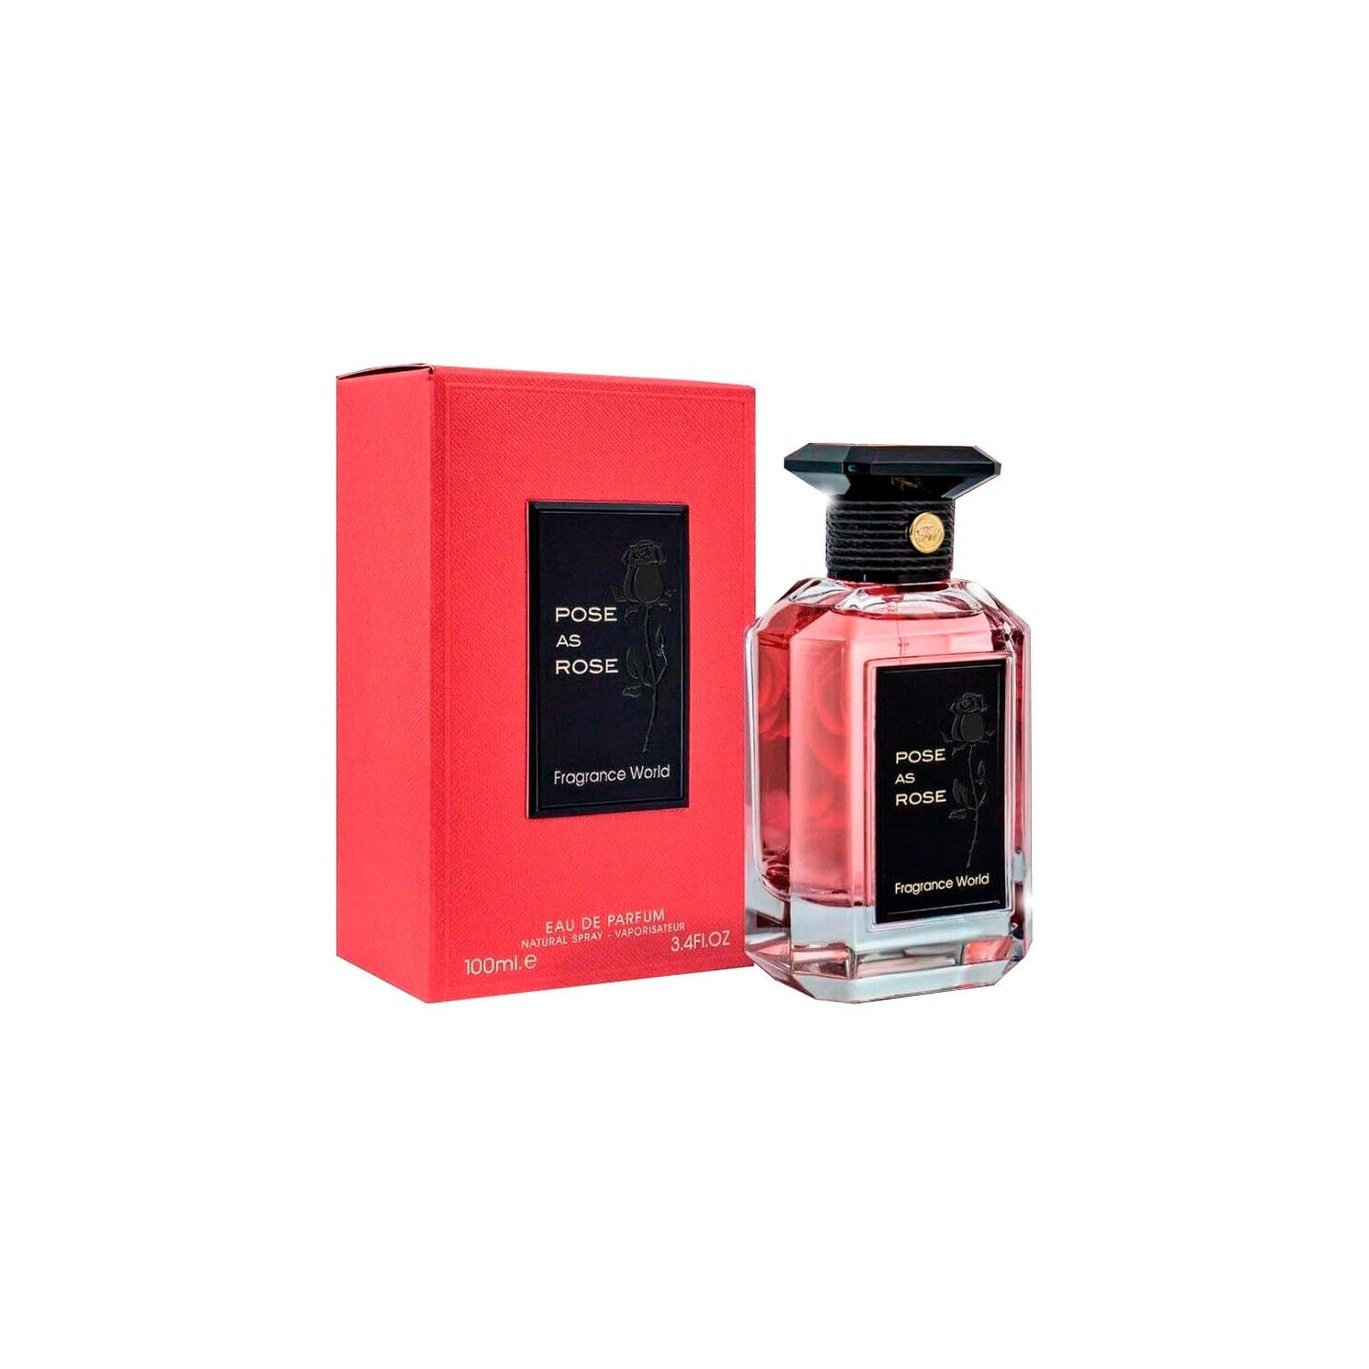 Pose as Rose EDP 100ml By Fragrance World